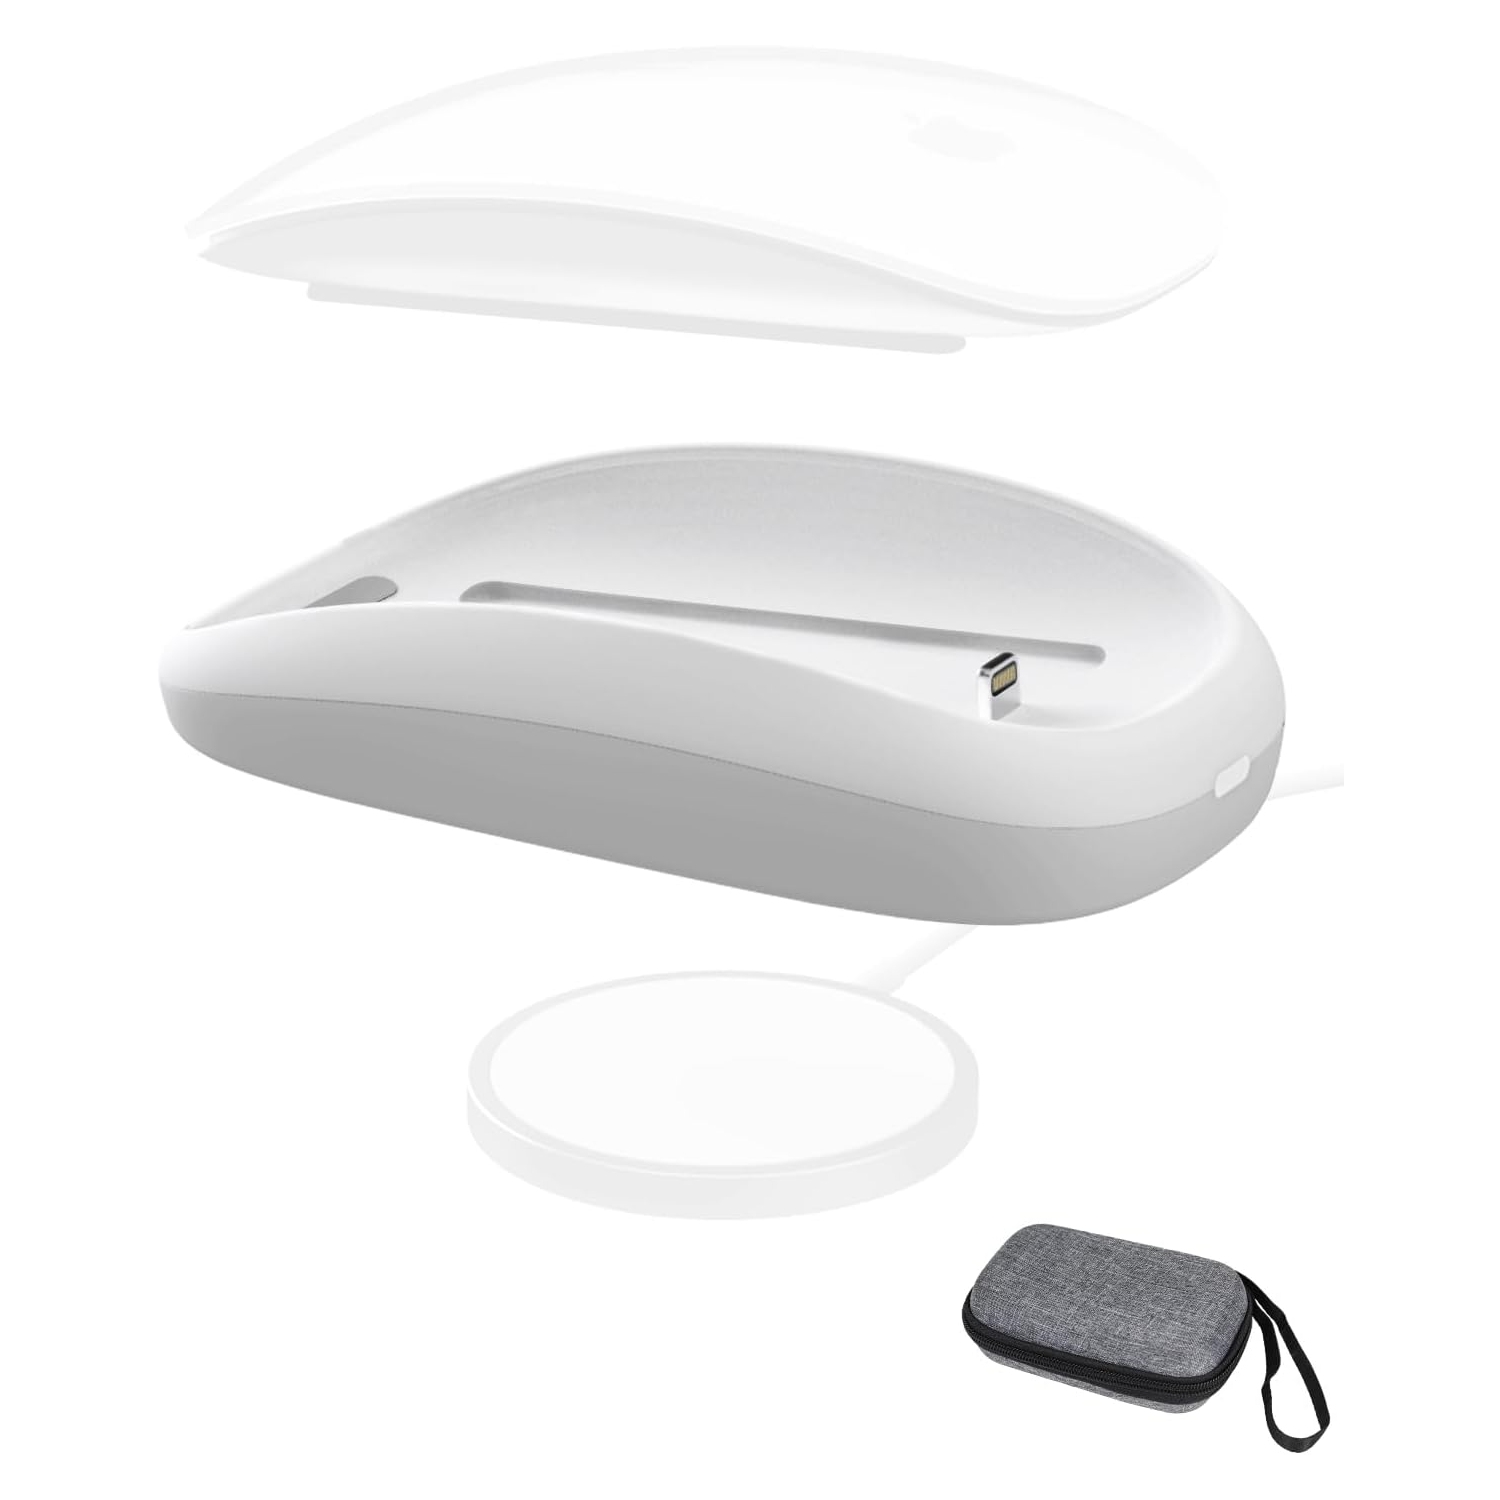 Ergonomic Charging Base for Magic Mouse 2, Ergonomic Grip with Portable Storage Case,Wireless Charging Support, Increase Comfort and Full Control,White